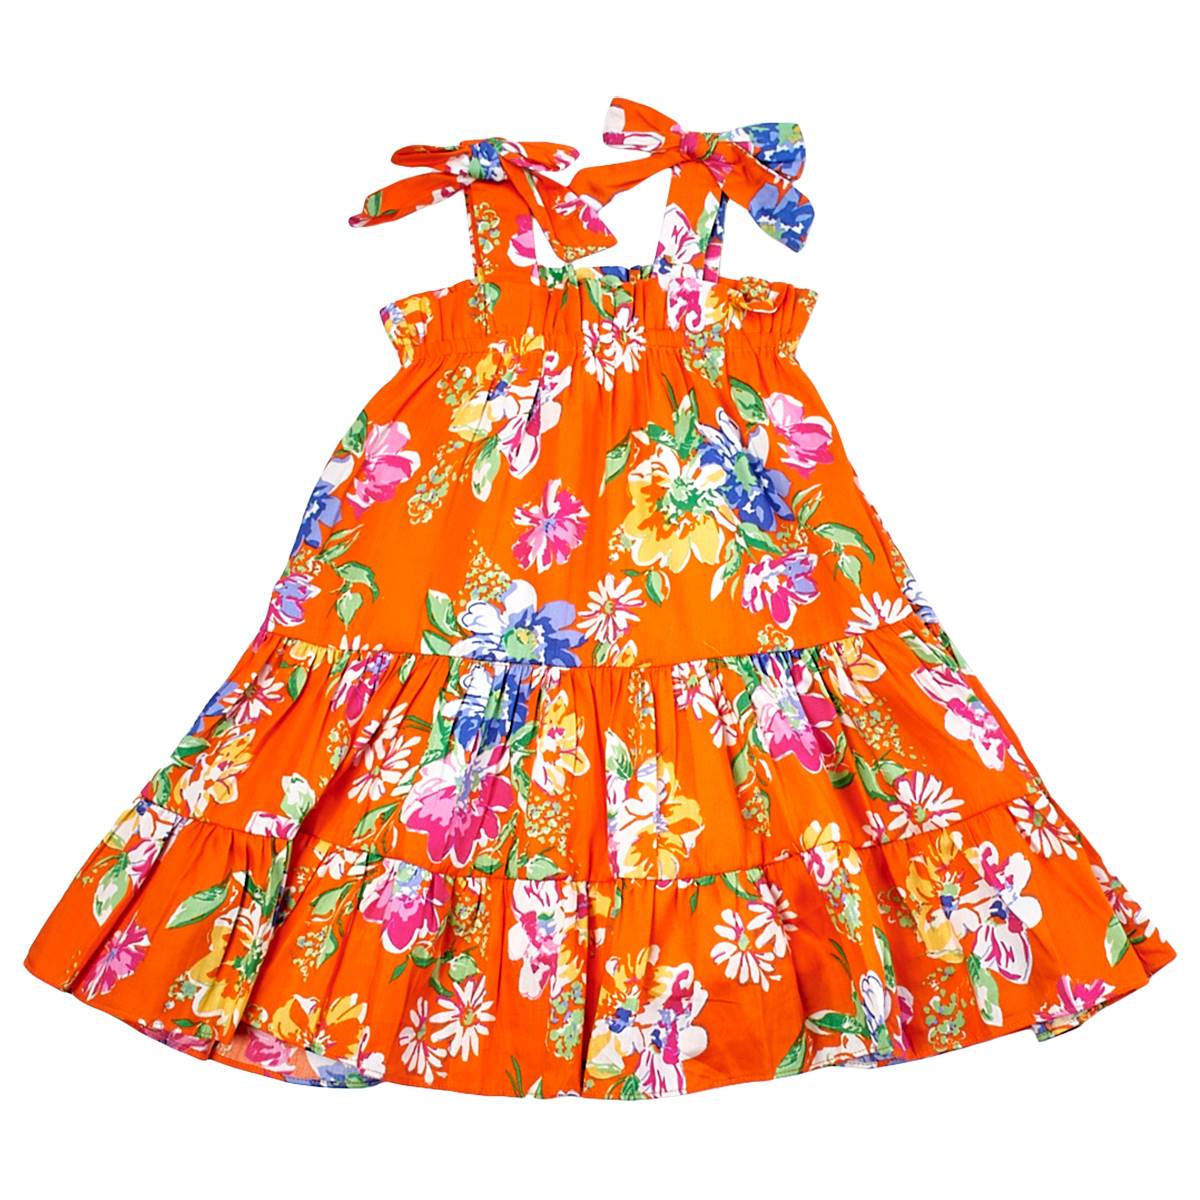 Girls (4-6x) Rare Editions Floral Tiered Dress W/Bow Ties